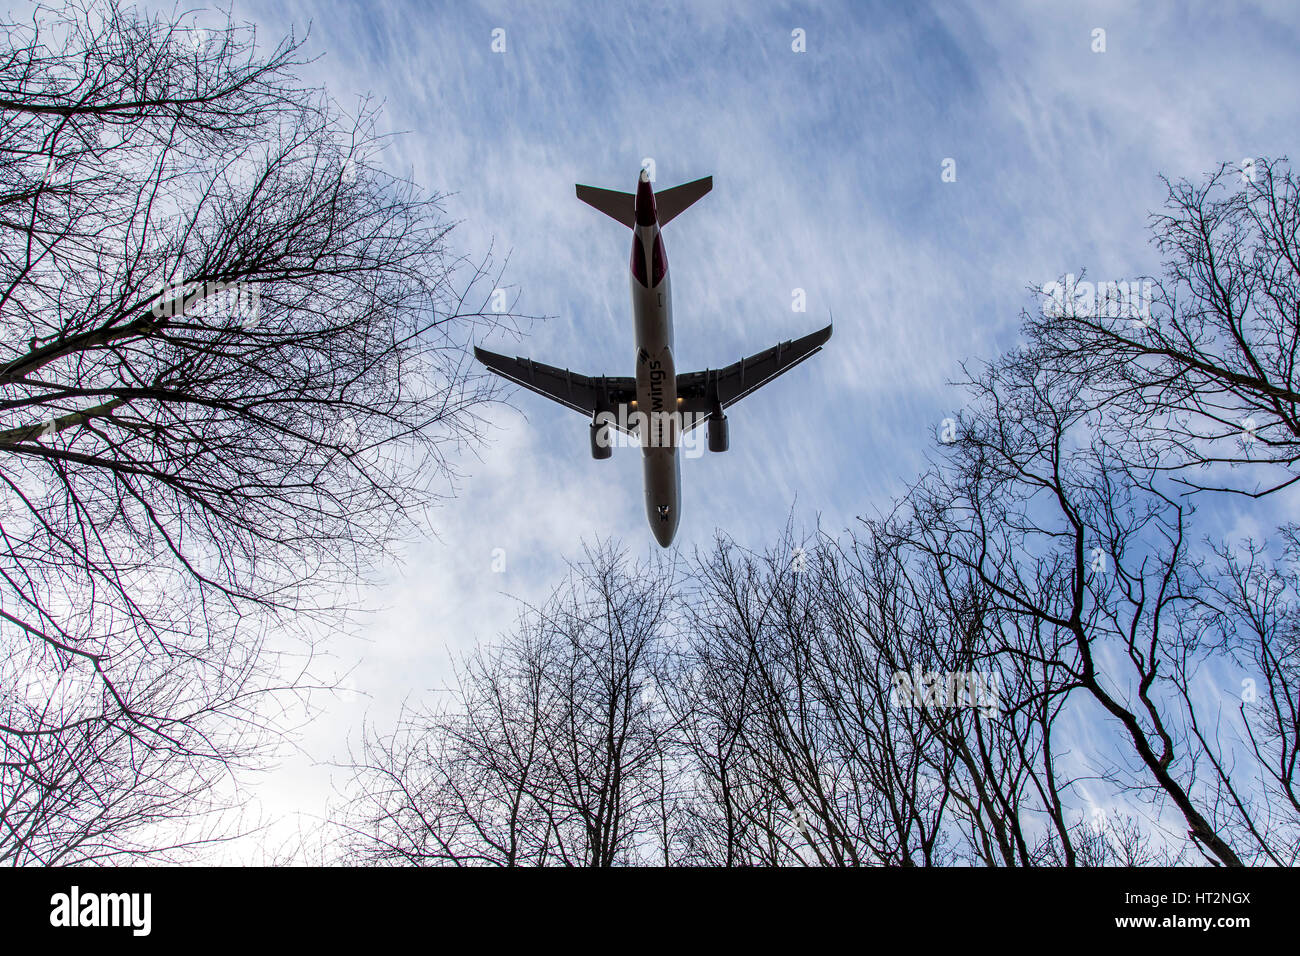 Aviation, plane at Landing approach to DŸsseldorf International Airport, Germany,  trees, Stock Photo